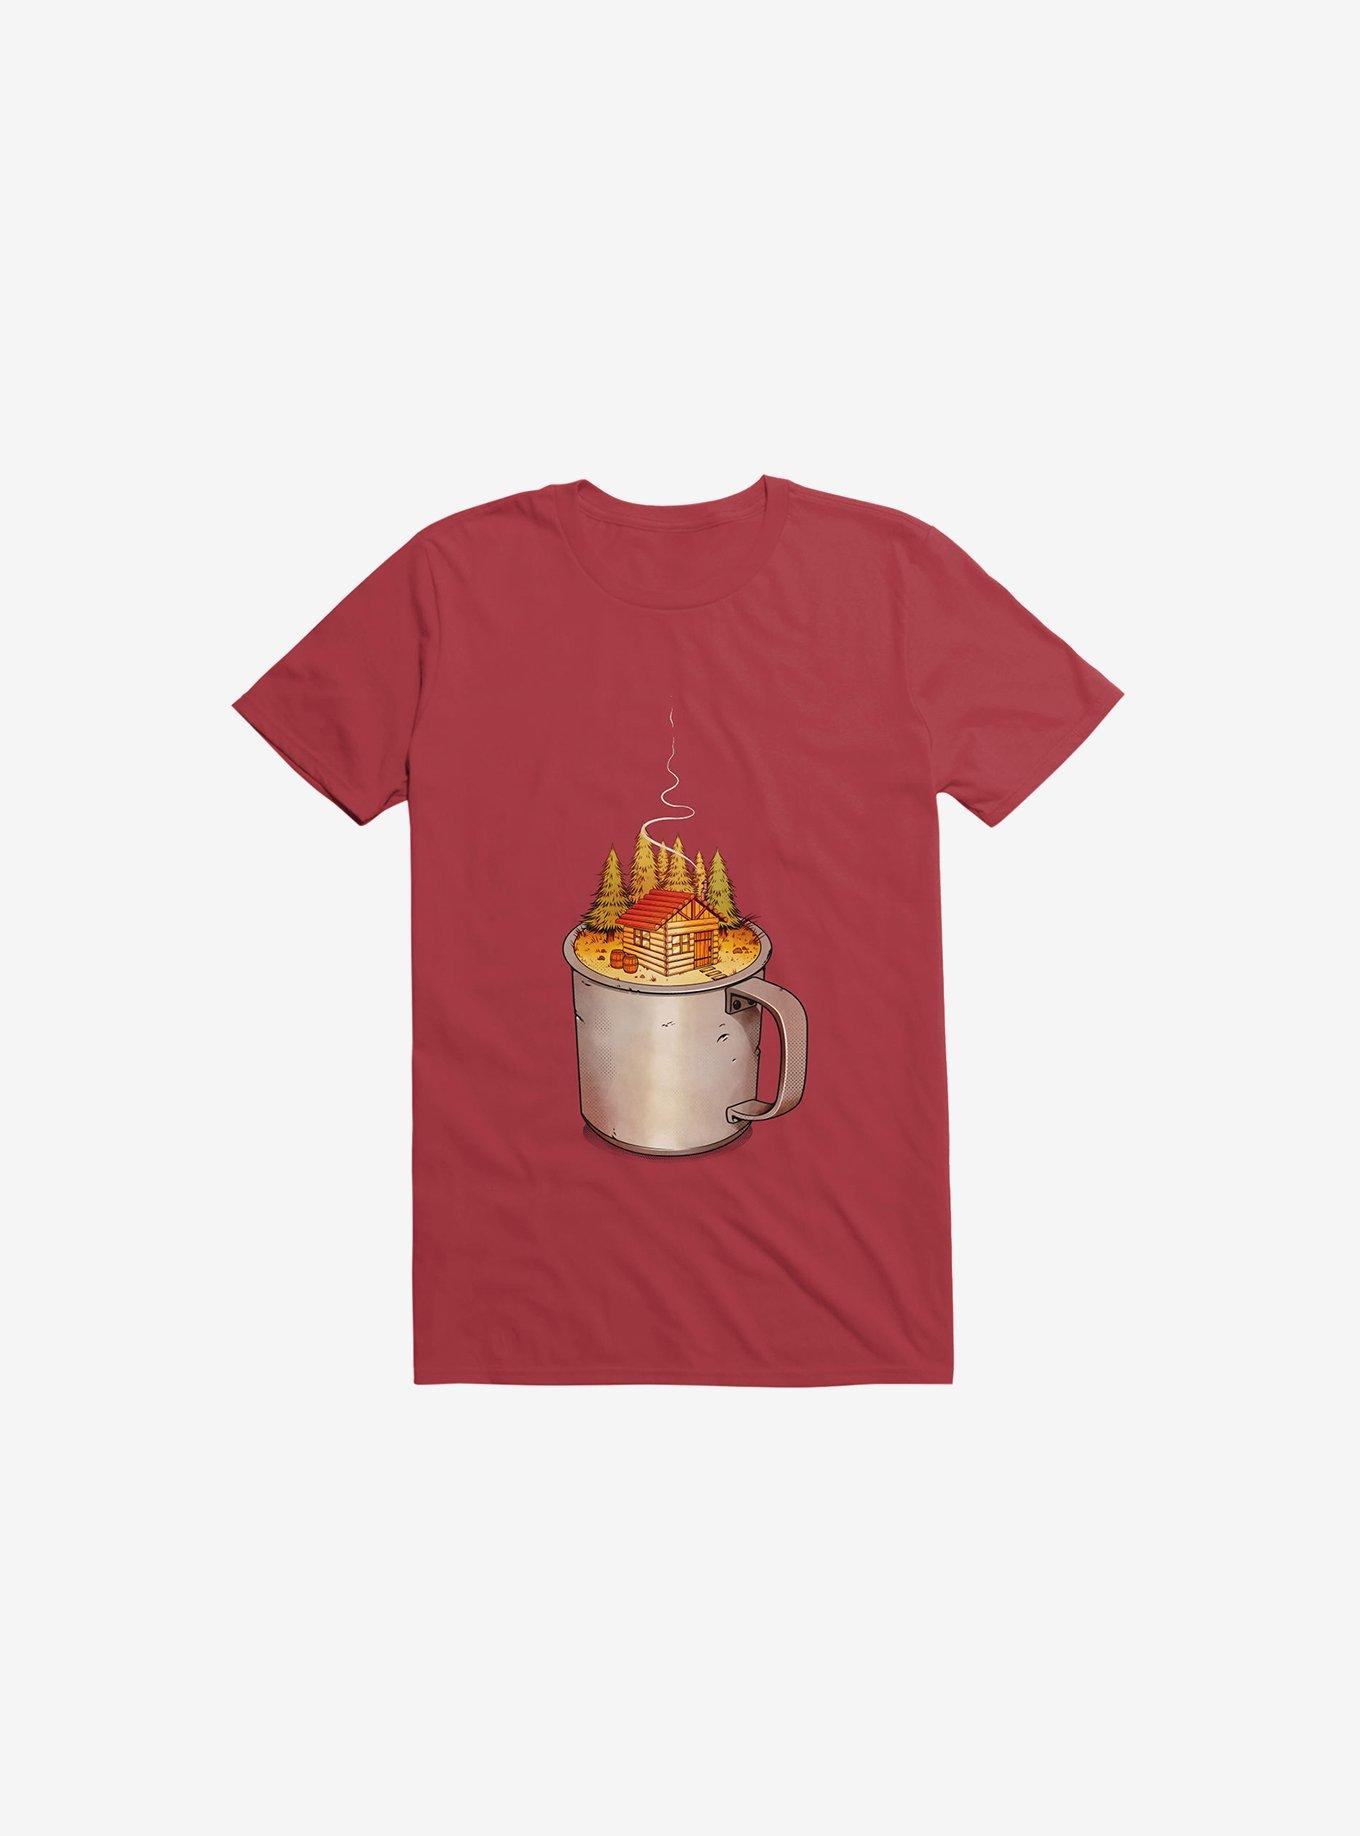 My Camp Of Tea Red T-Shirt